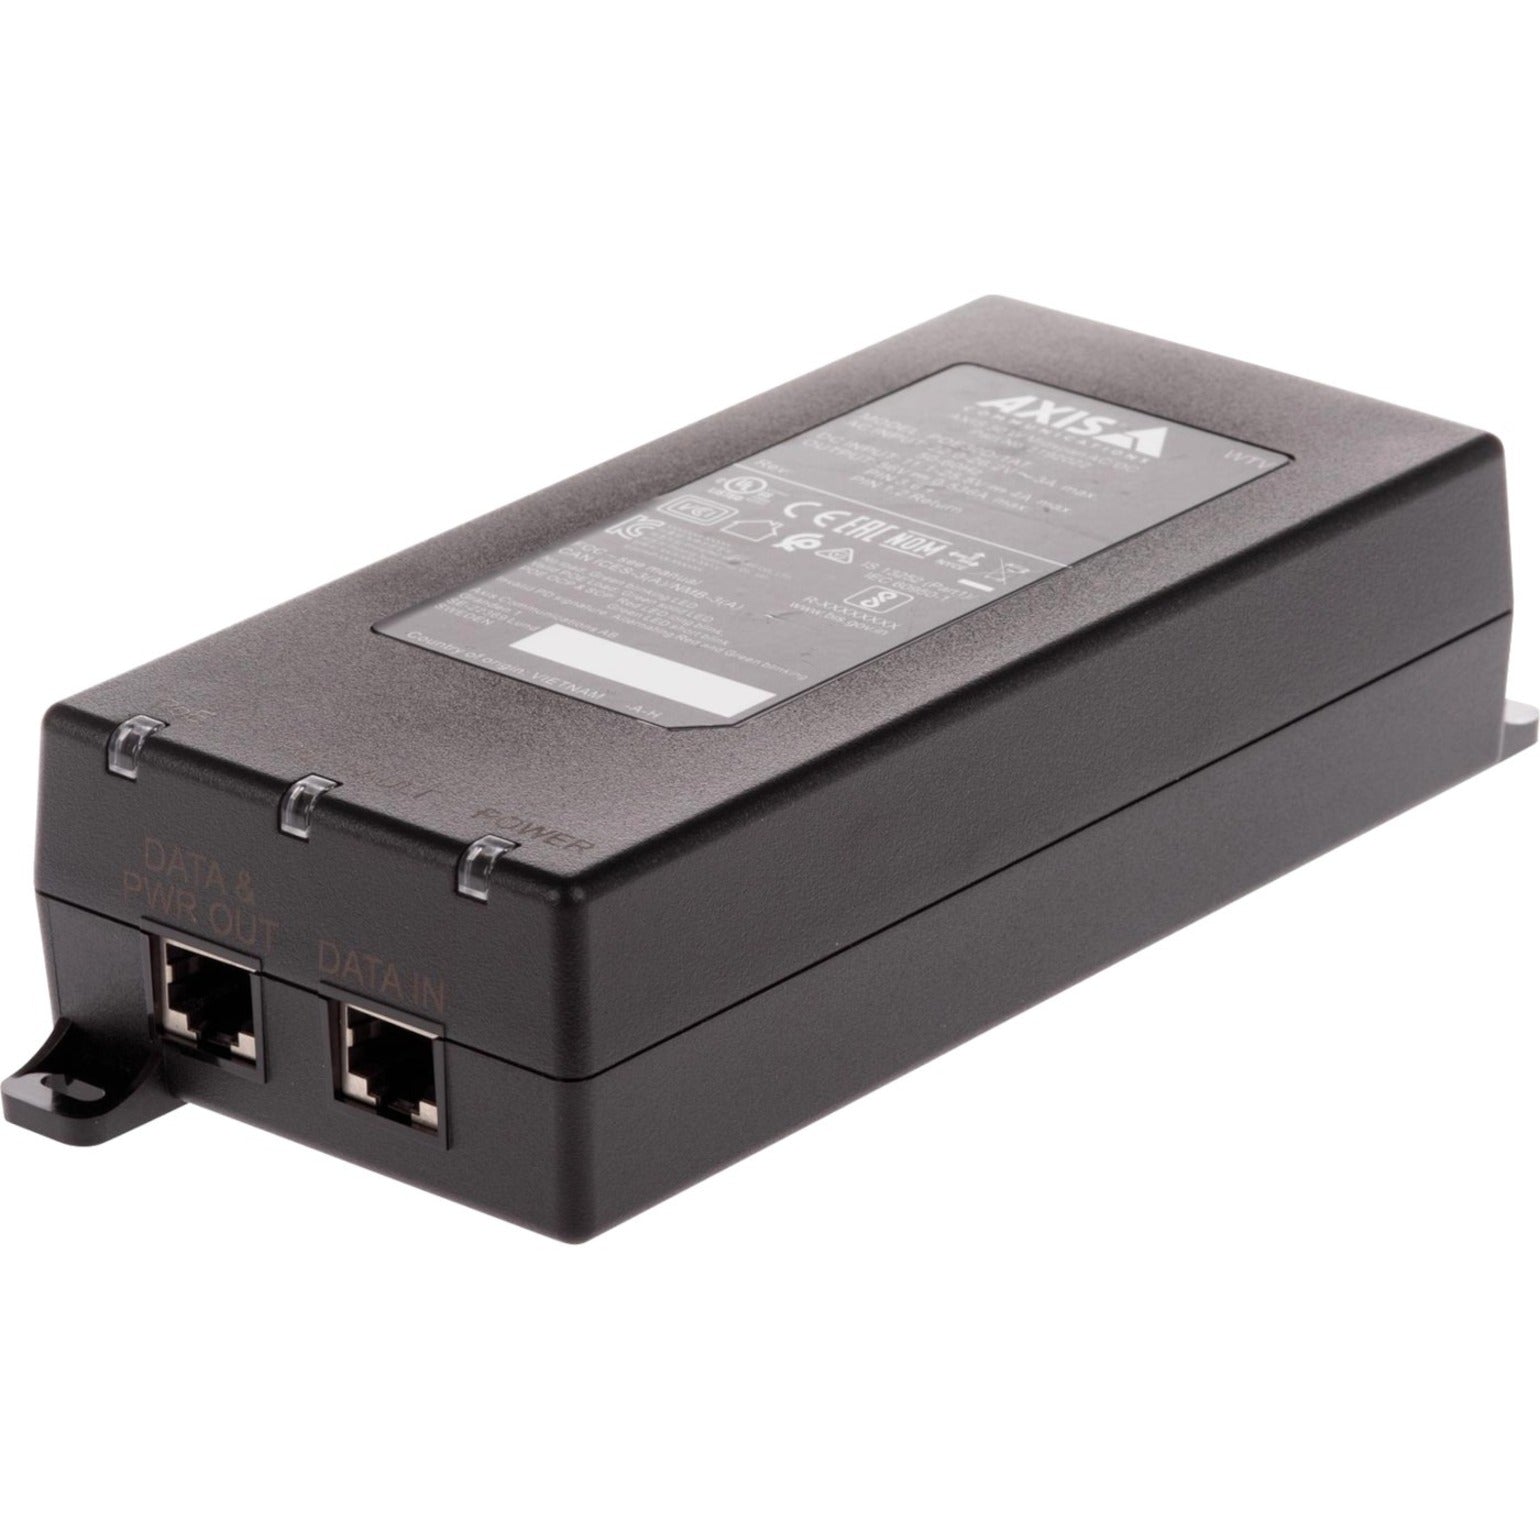 AXIS 02209-001 90 W Midspan AC/DC, PoE Injector for Powering IP Cameras